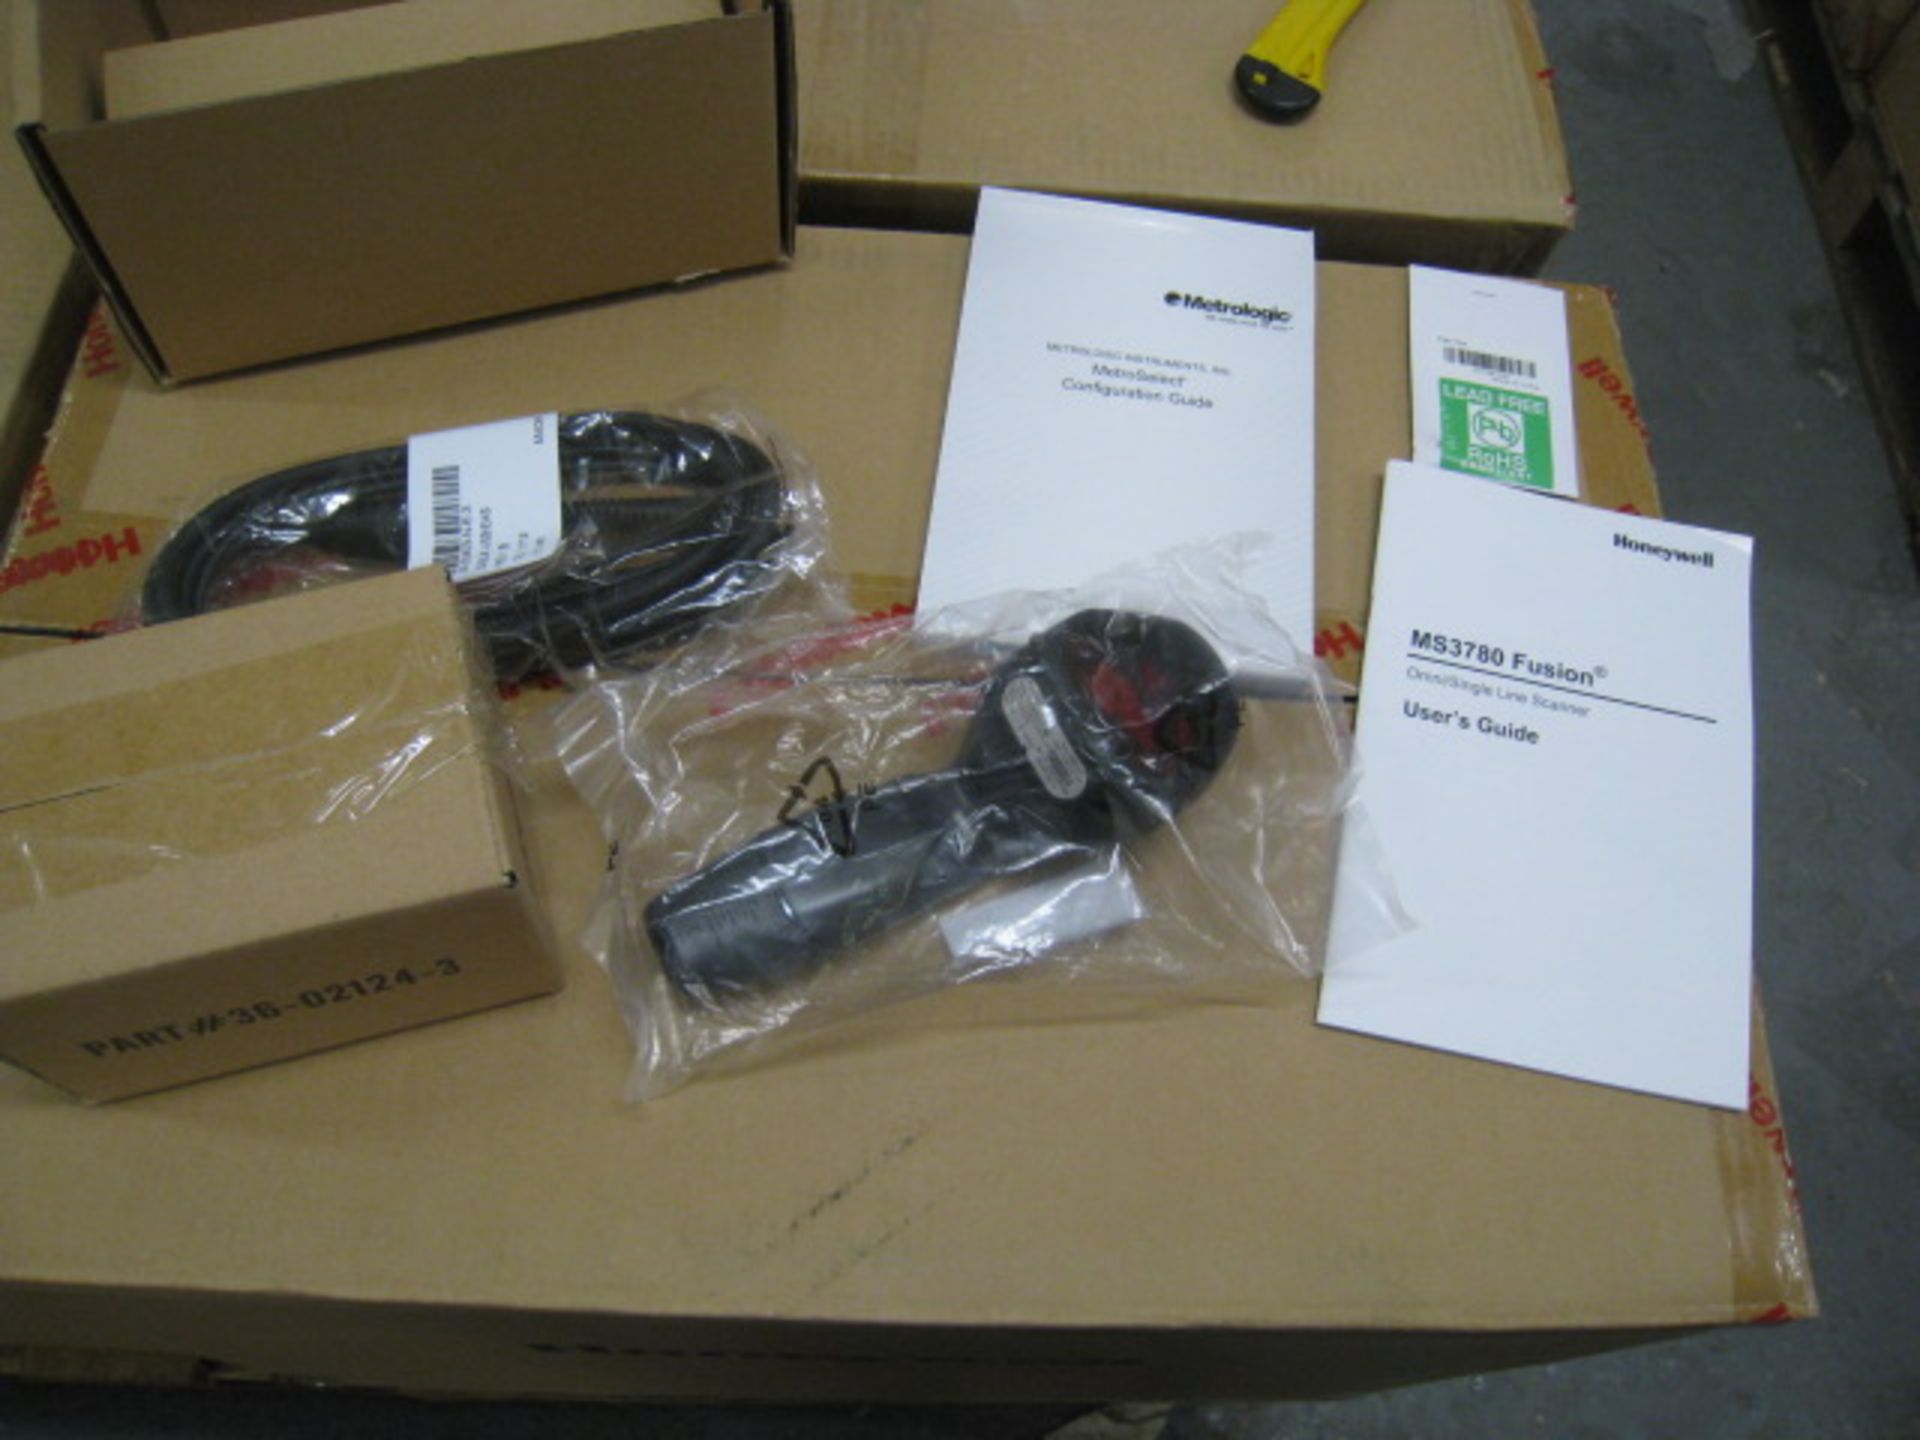 HONEYWELL MK3780-61A38/EAS BARCODE SCANNER NEW IN SEALED BOX. More info at: http://www.ebay.co.uk/ - Image 2 of 2